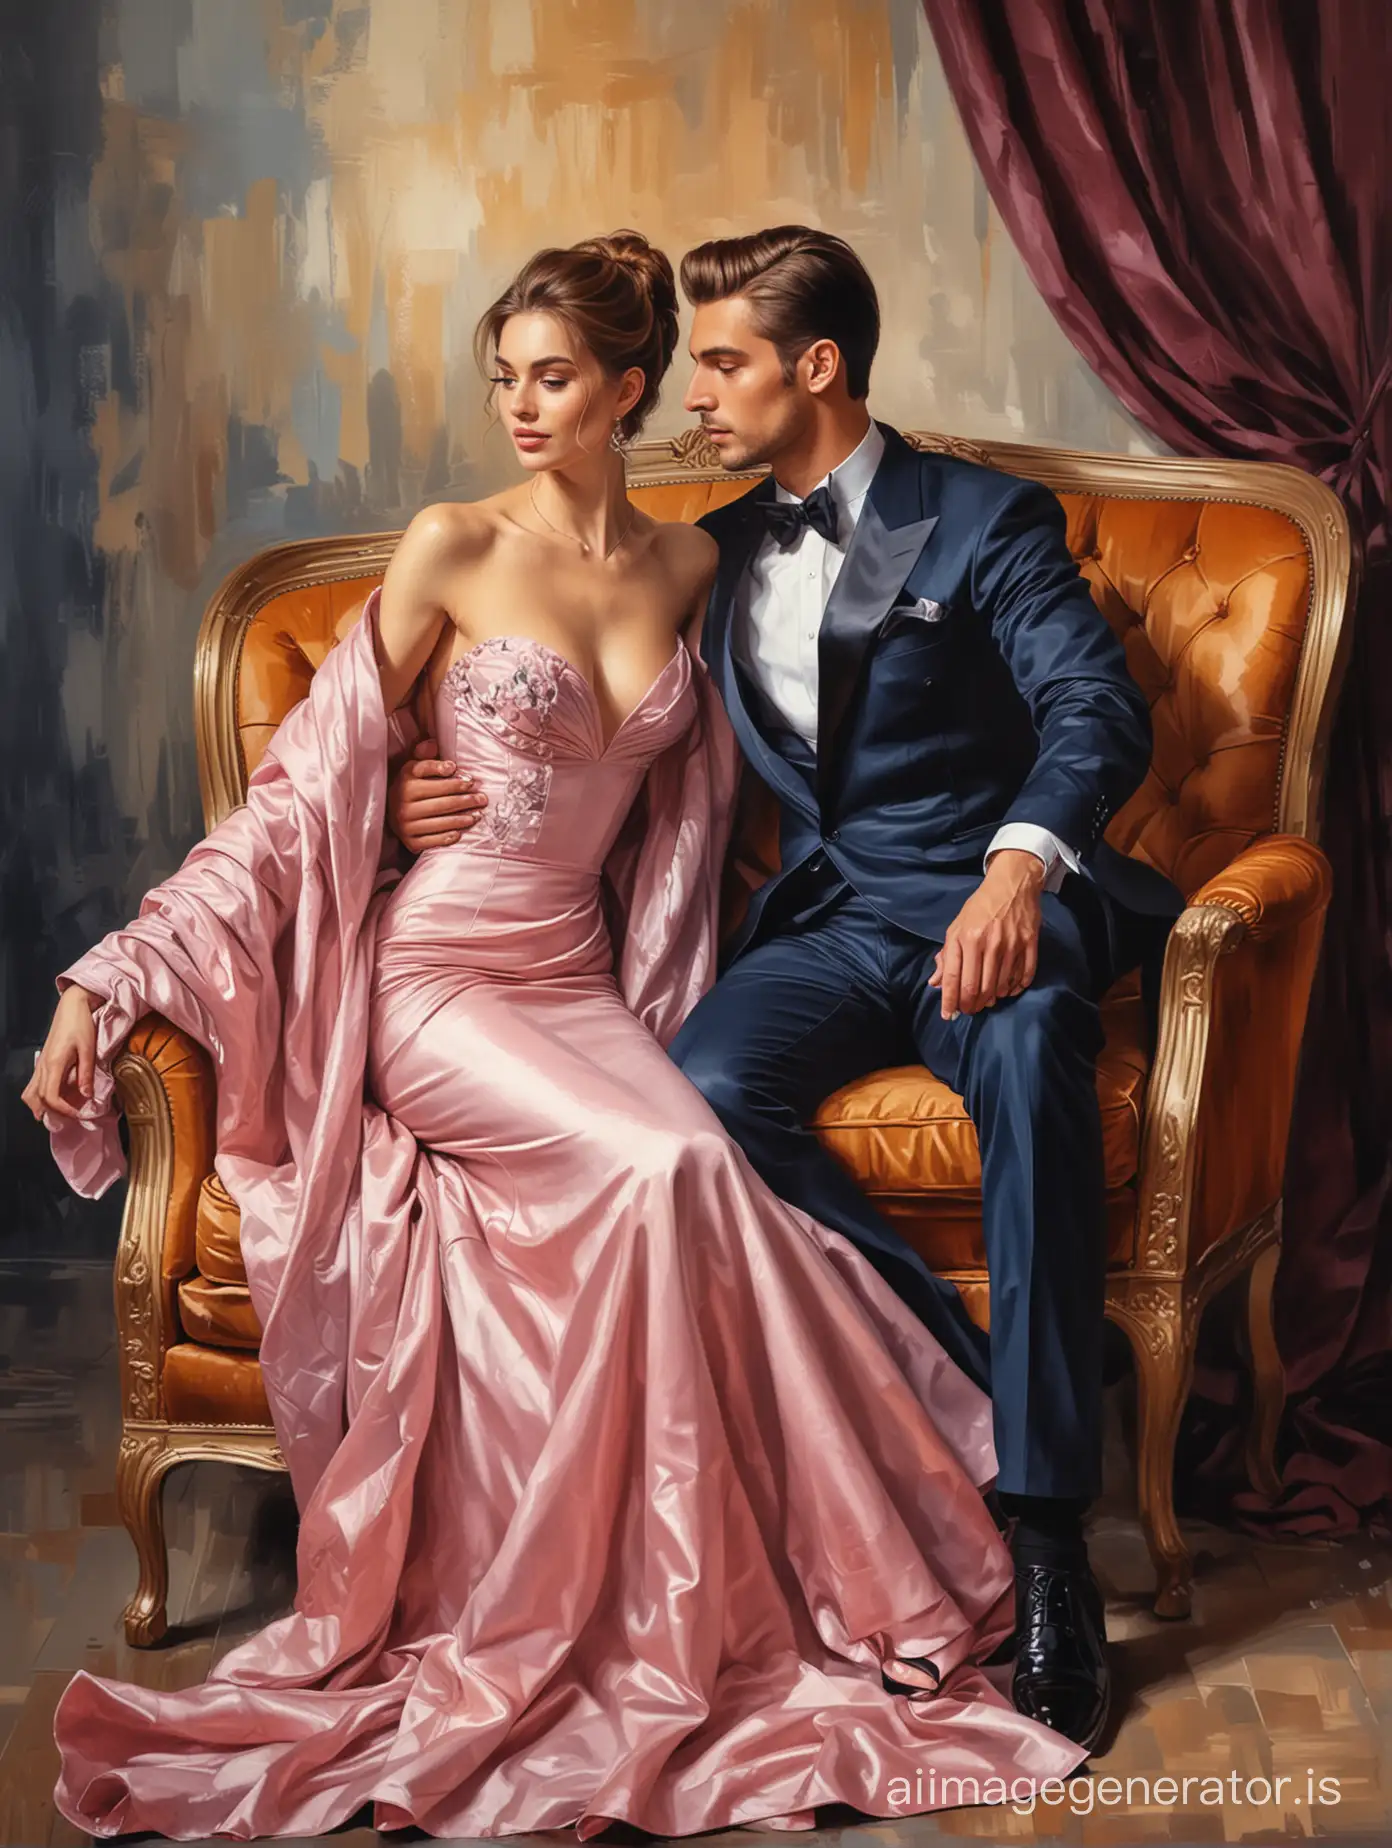 luxury, colors, modern style, a man in a jacket sits in an armchair, next to stands a woman in an evening dress, putting her hand on the man's shoulder, the painting is made in the artistic style of oil paints